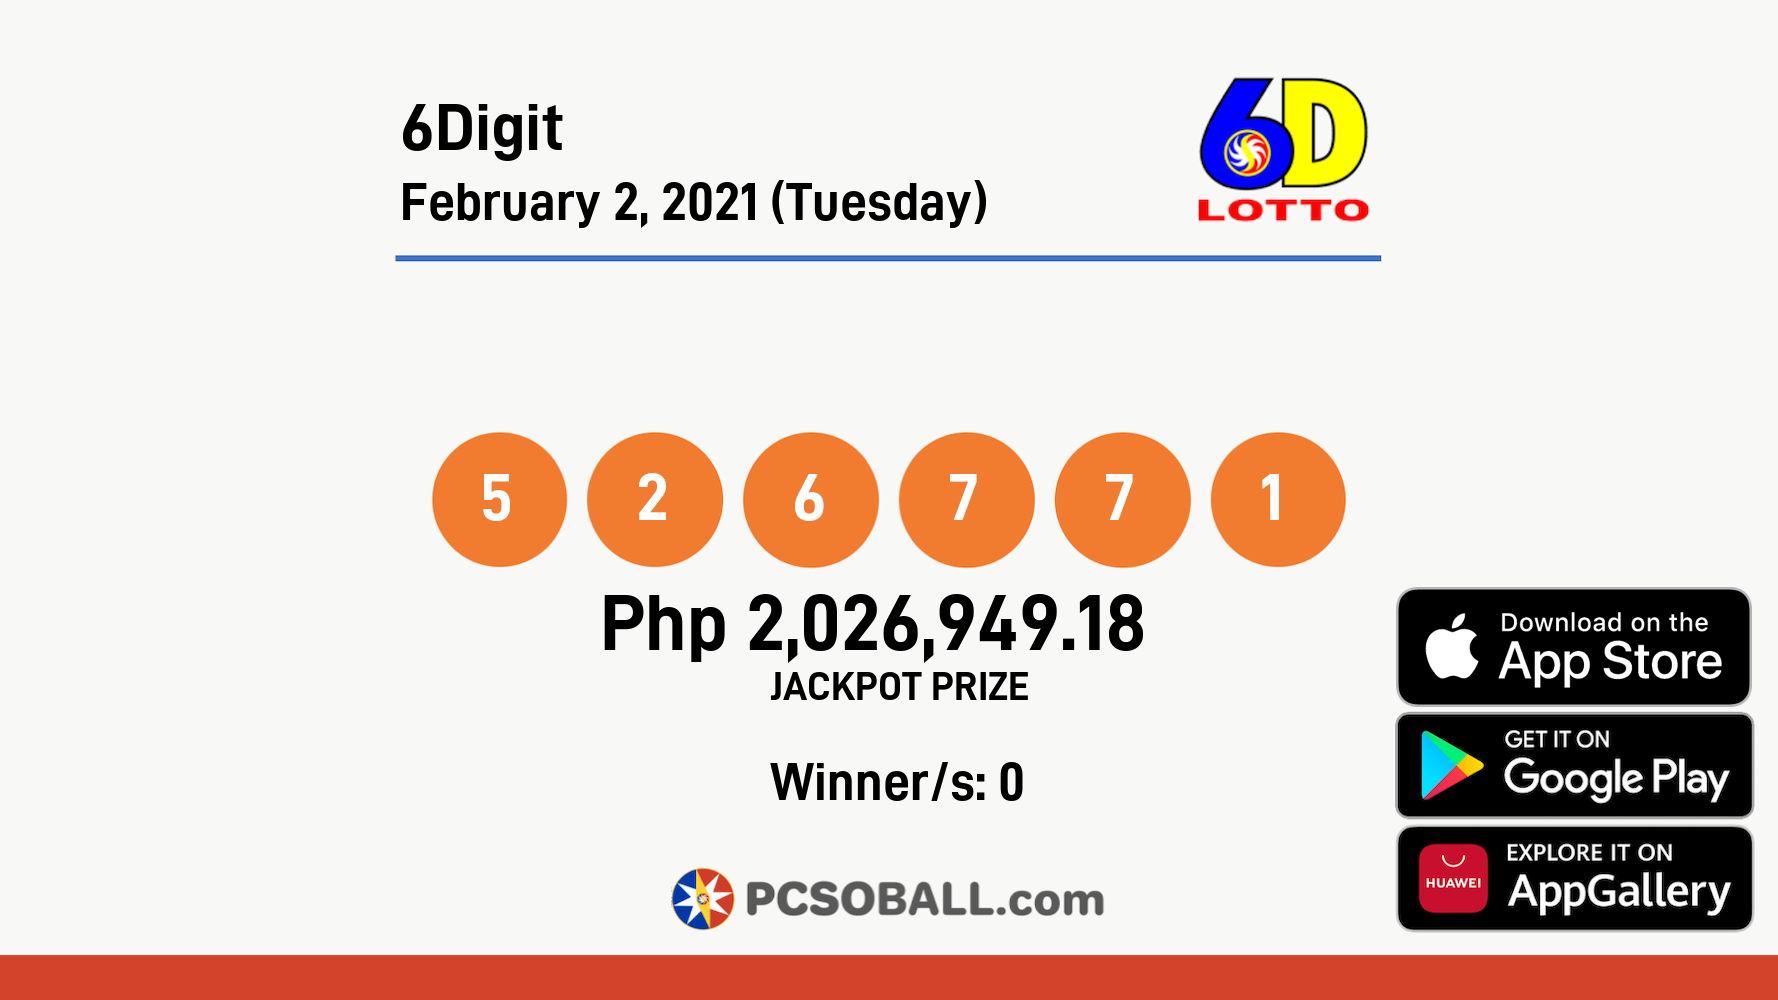 6Digit February 2, 2021 (Tuesday) Result